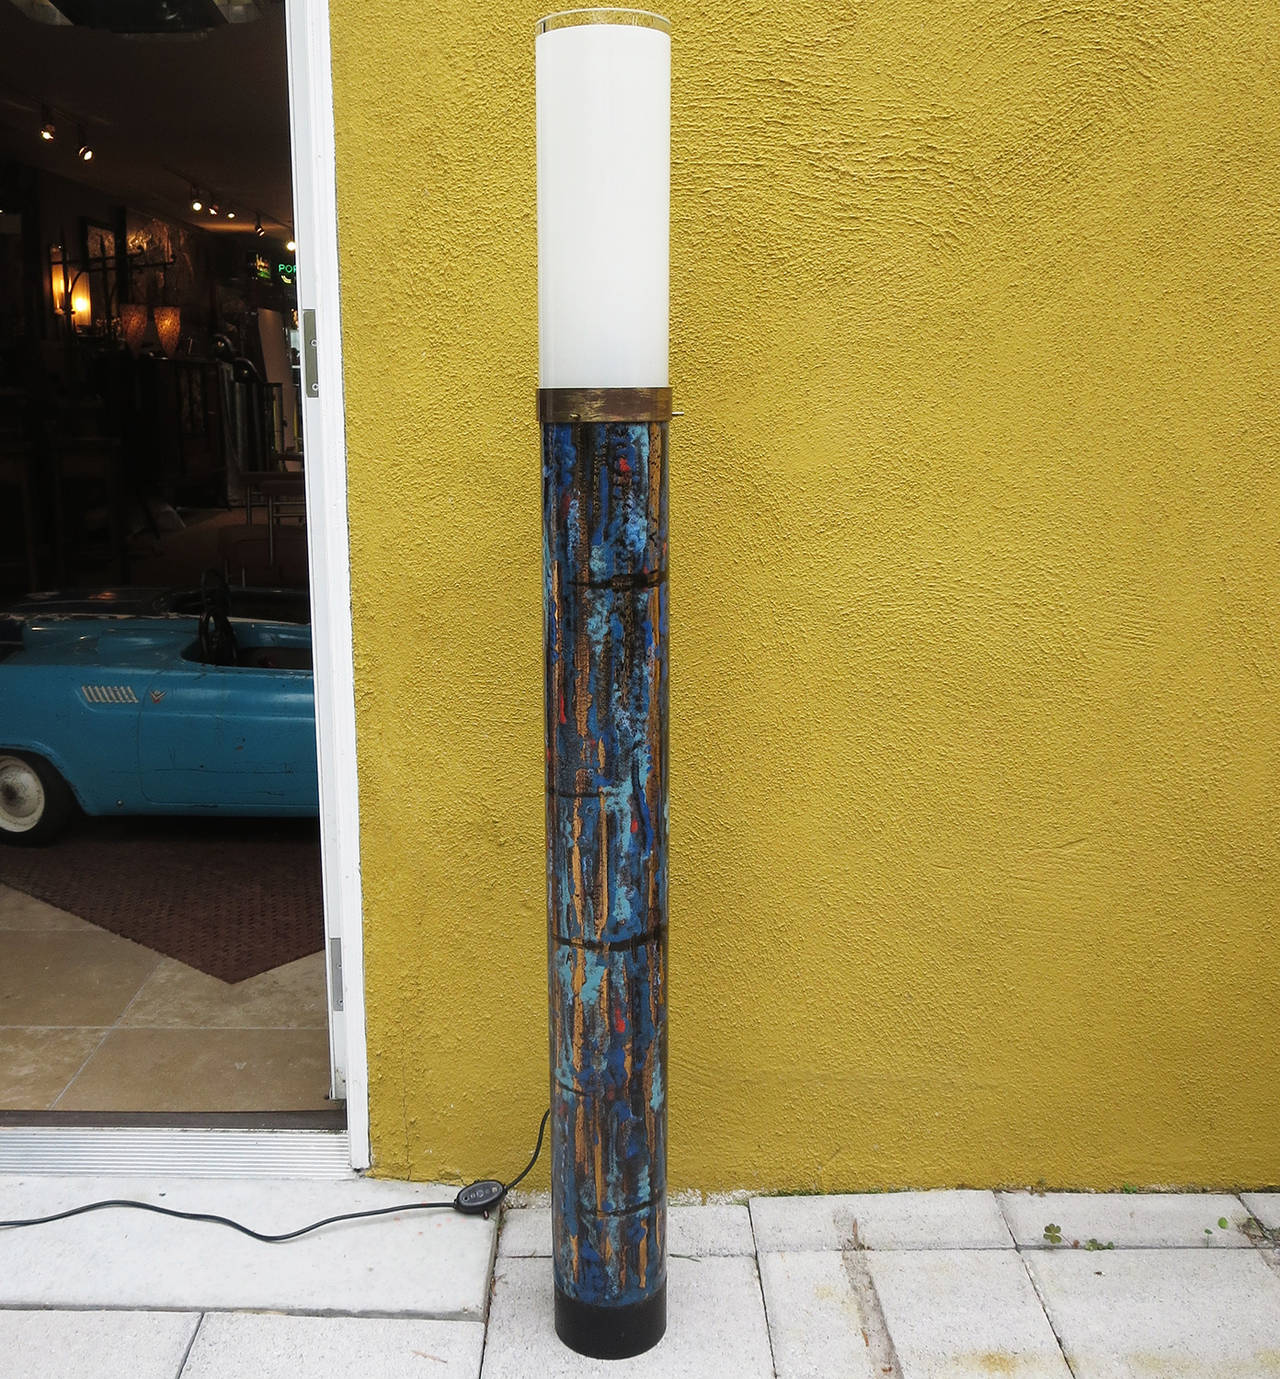 This wonderful and unique floor lamp is glazed ceramic, topped with a thick molded glass shade. The column is similar to the works of Marcello Fantoni, who created wonderful designs for Raymor in the 1950s and 1960s. Our lamp is in fantastic working